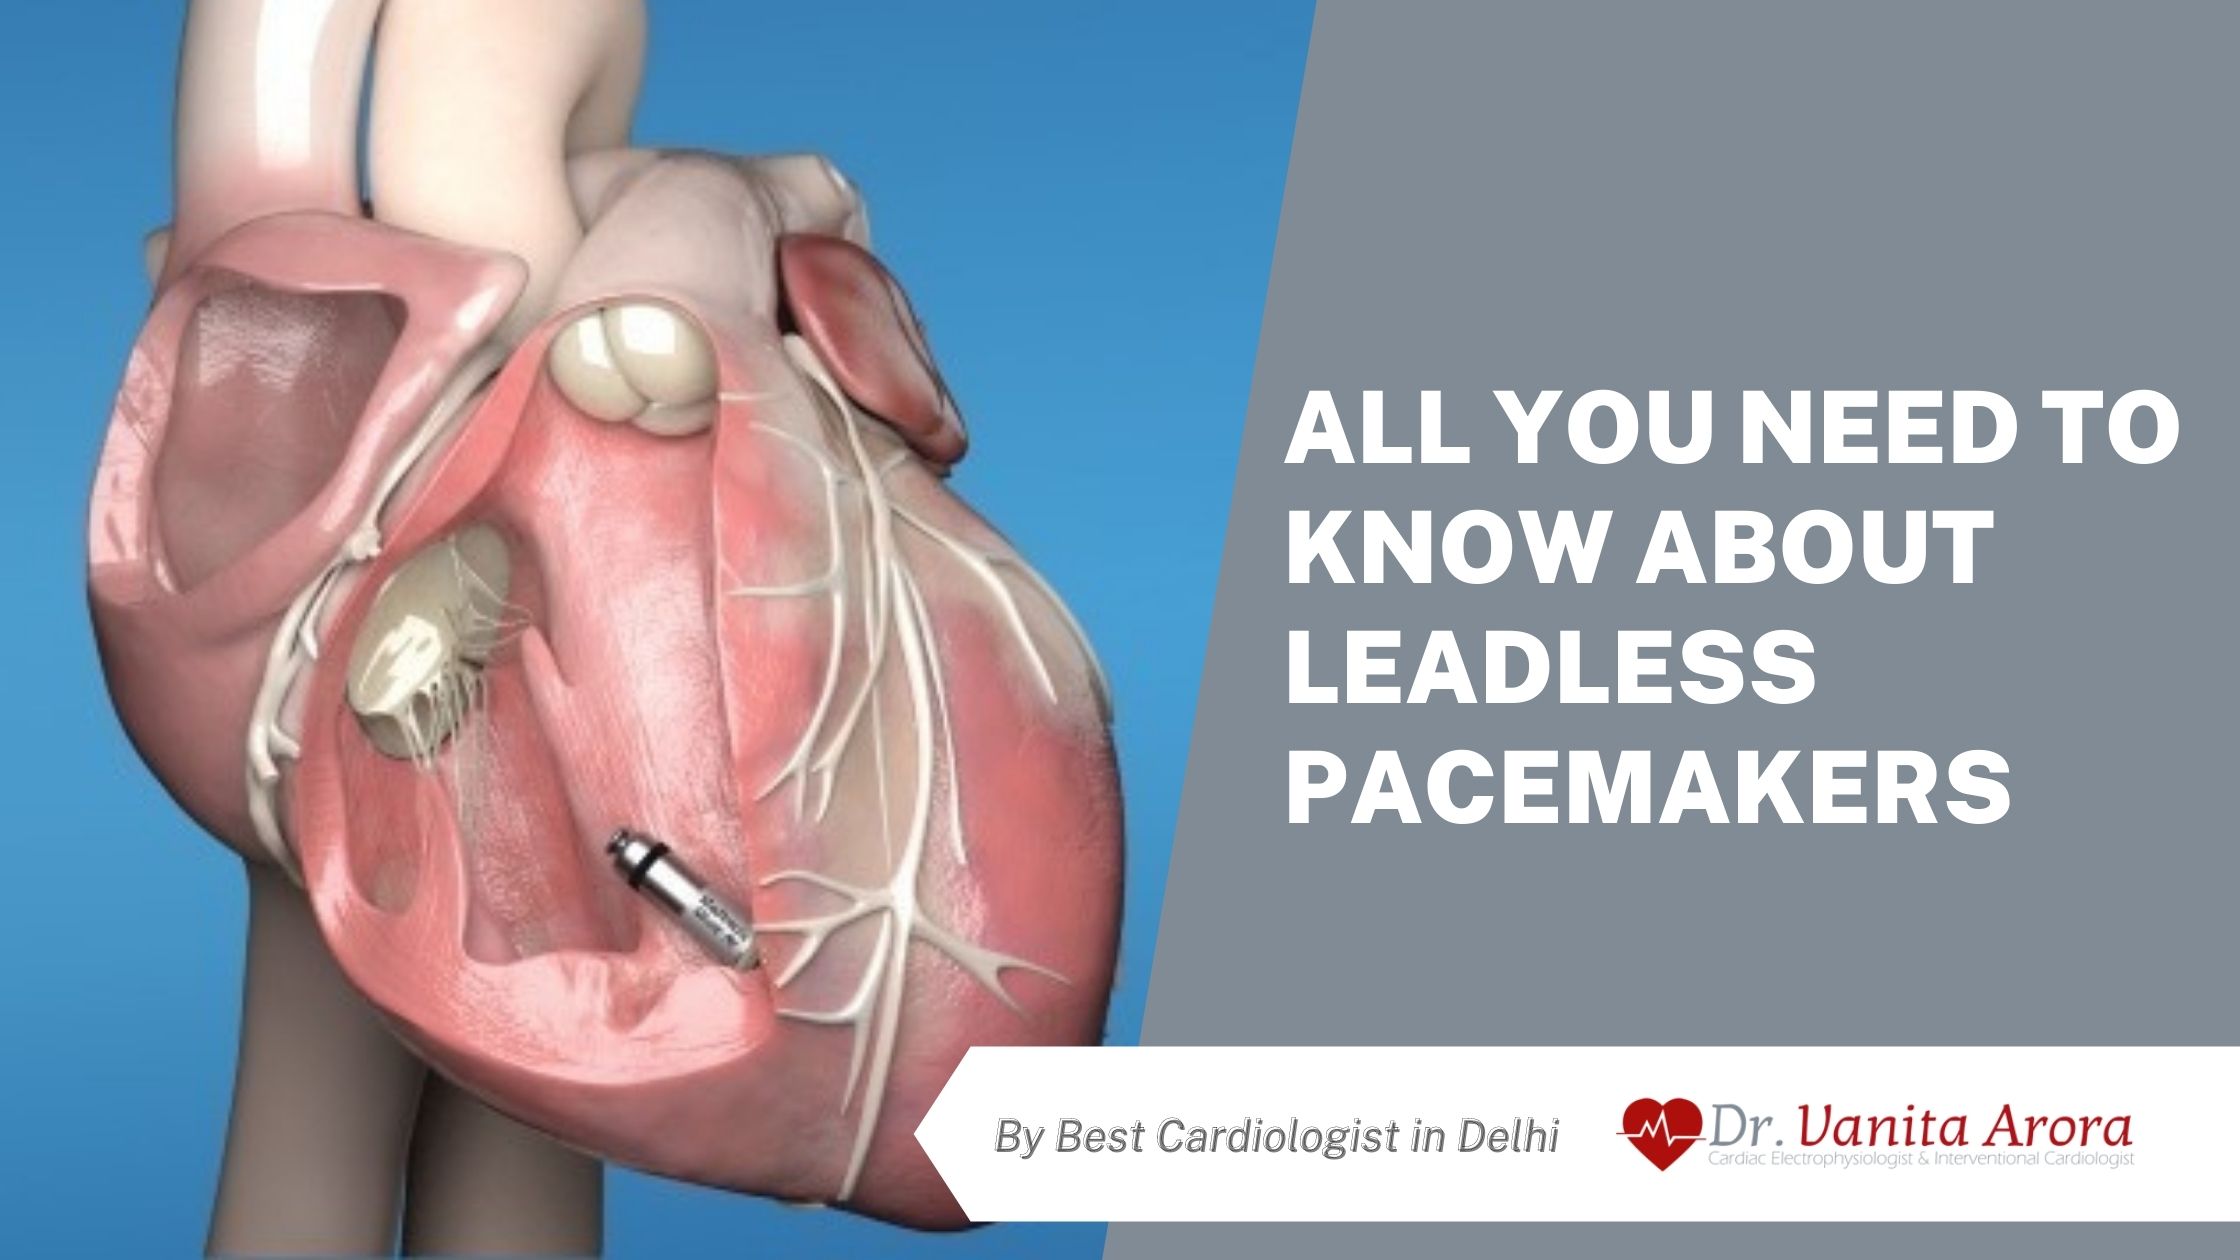 What You Need to Know About Leadless Pacemakers : By Best Cardiologist in Delhi